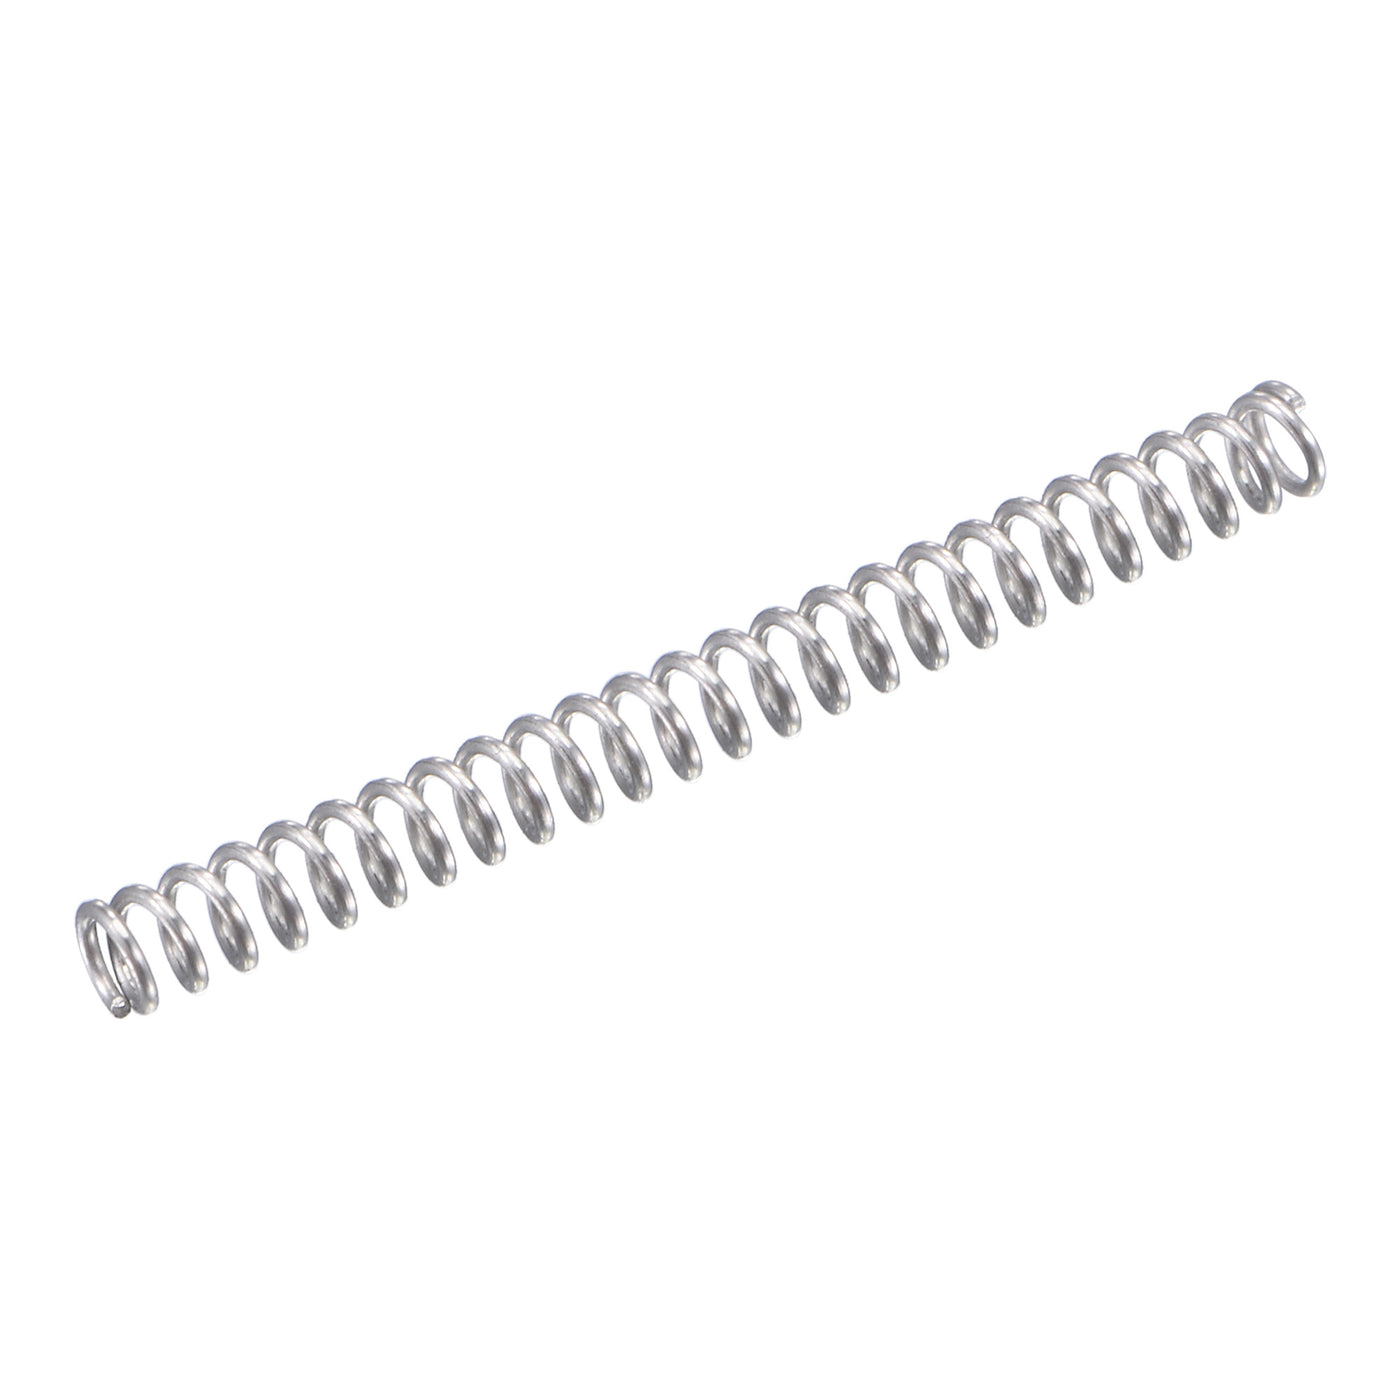 uxcell Uxcell 2mmx0.3mmx20mm 304 Stainless Steel Compression Spring 3.9N Load Capacity 20pcs